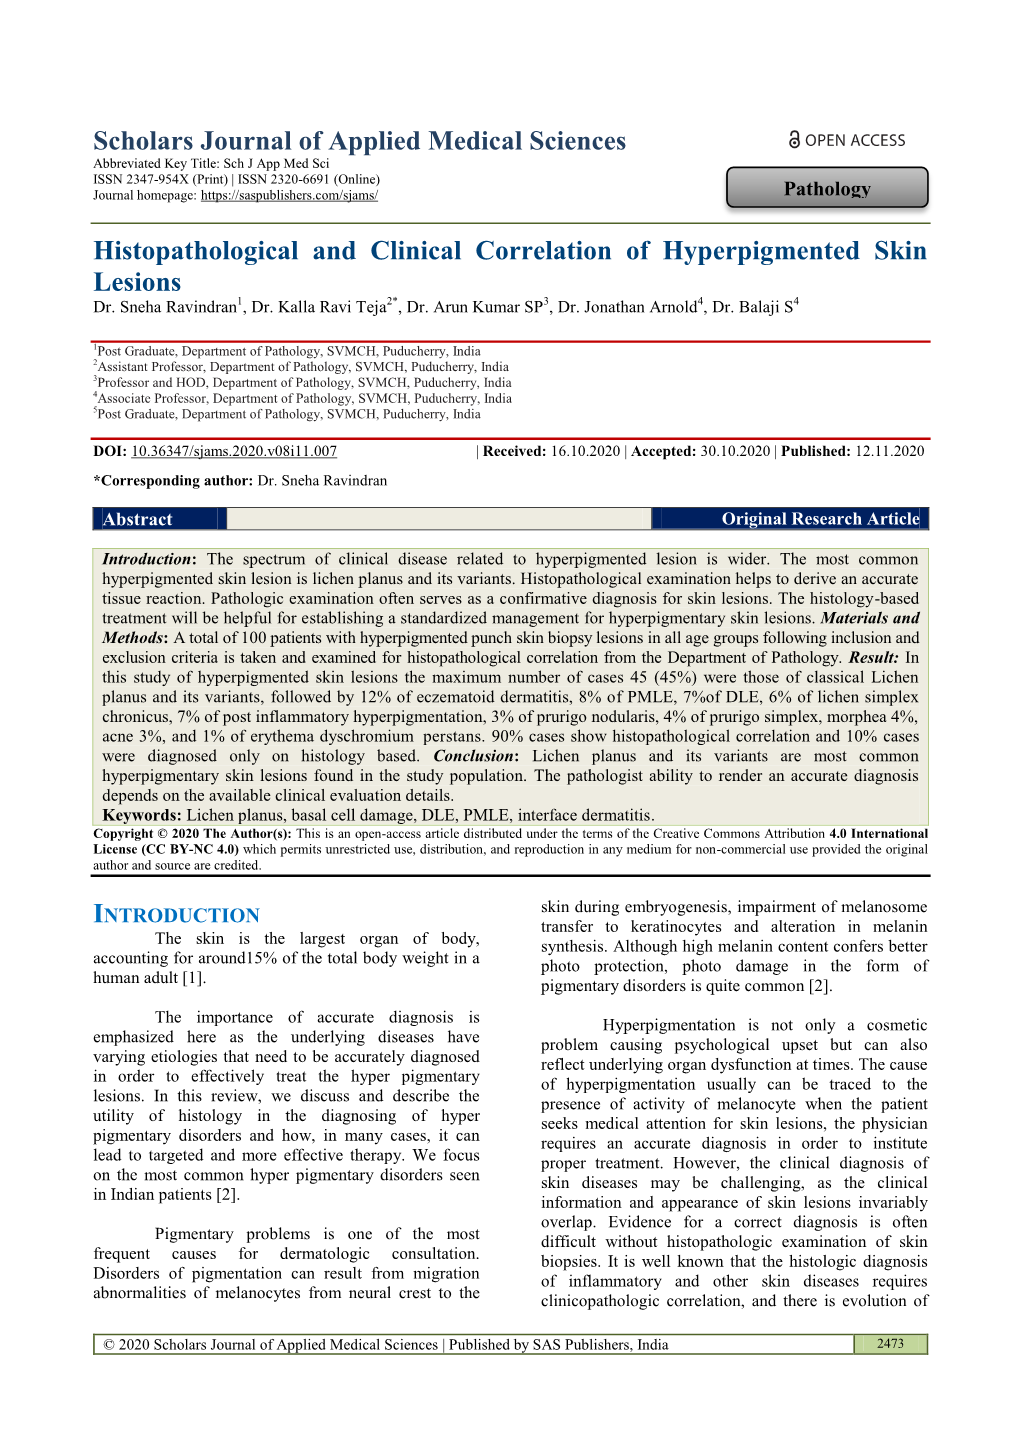 Histopathological and Clinical Correlation of Hyperpigmented Skin Lesions Dr